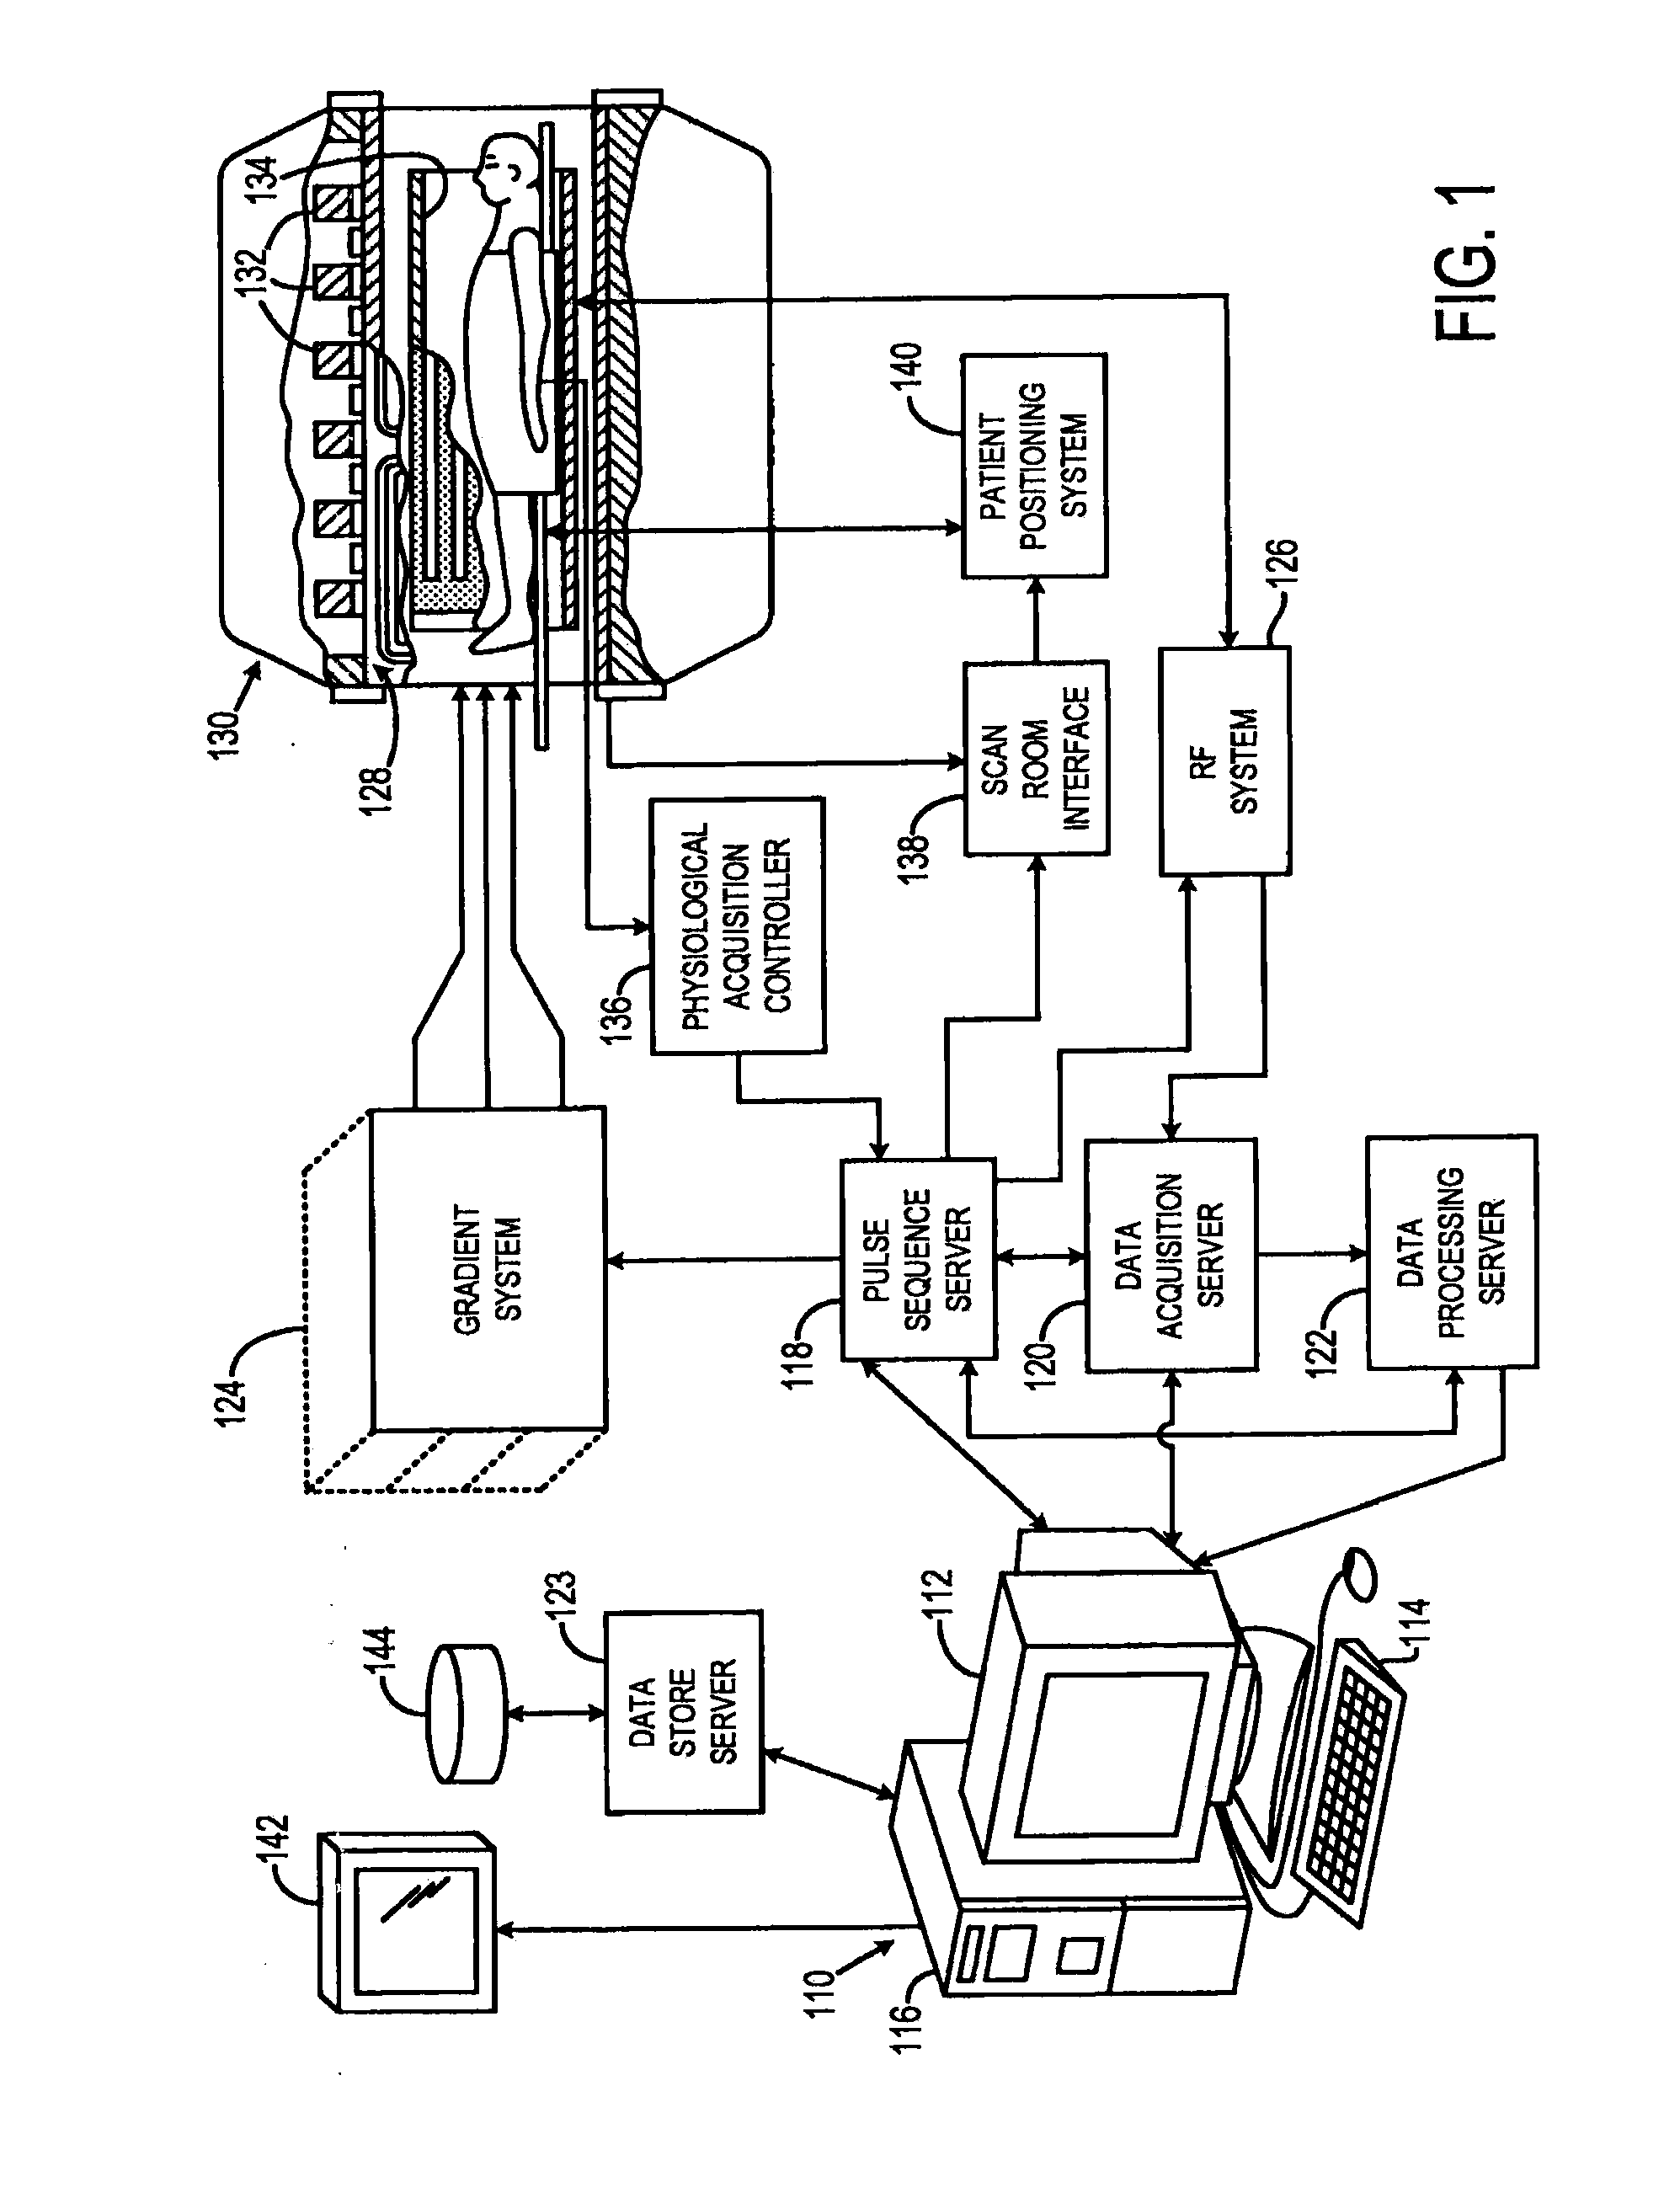 System and method for non-contrast enhanced pulmonary vein magnetic resonance imaging